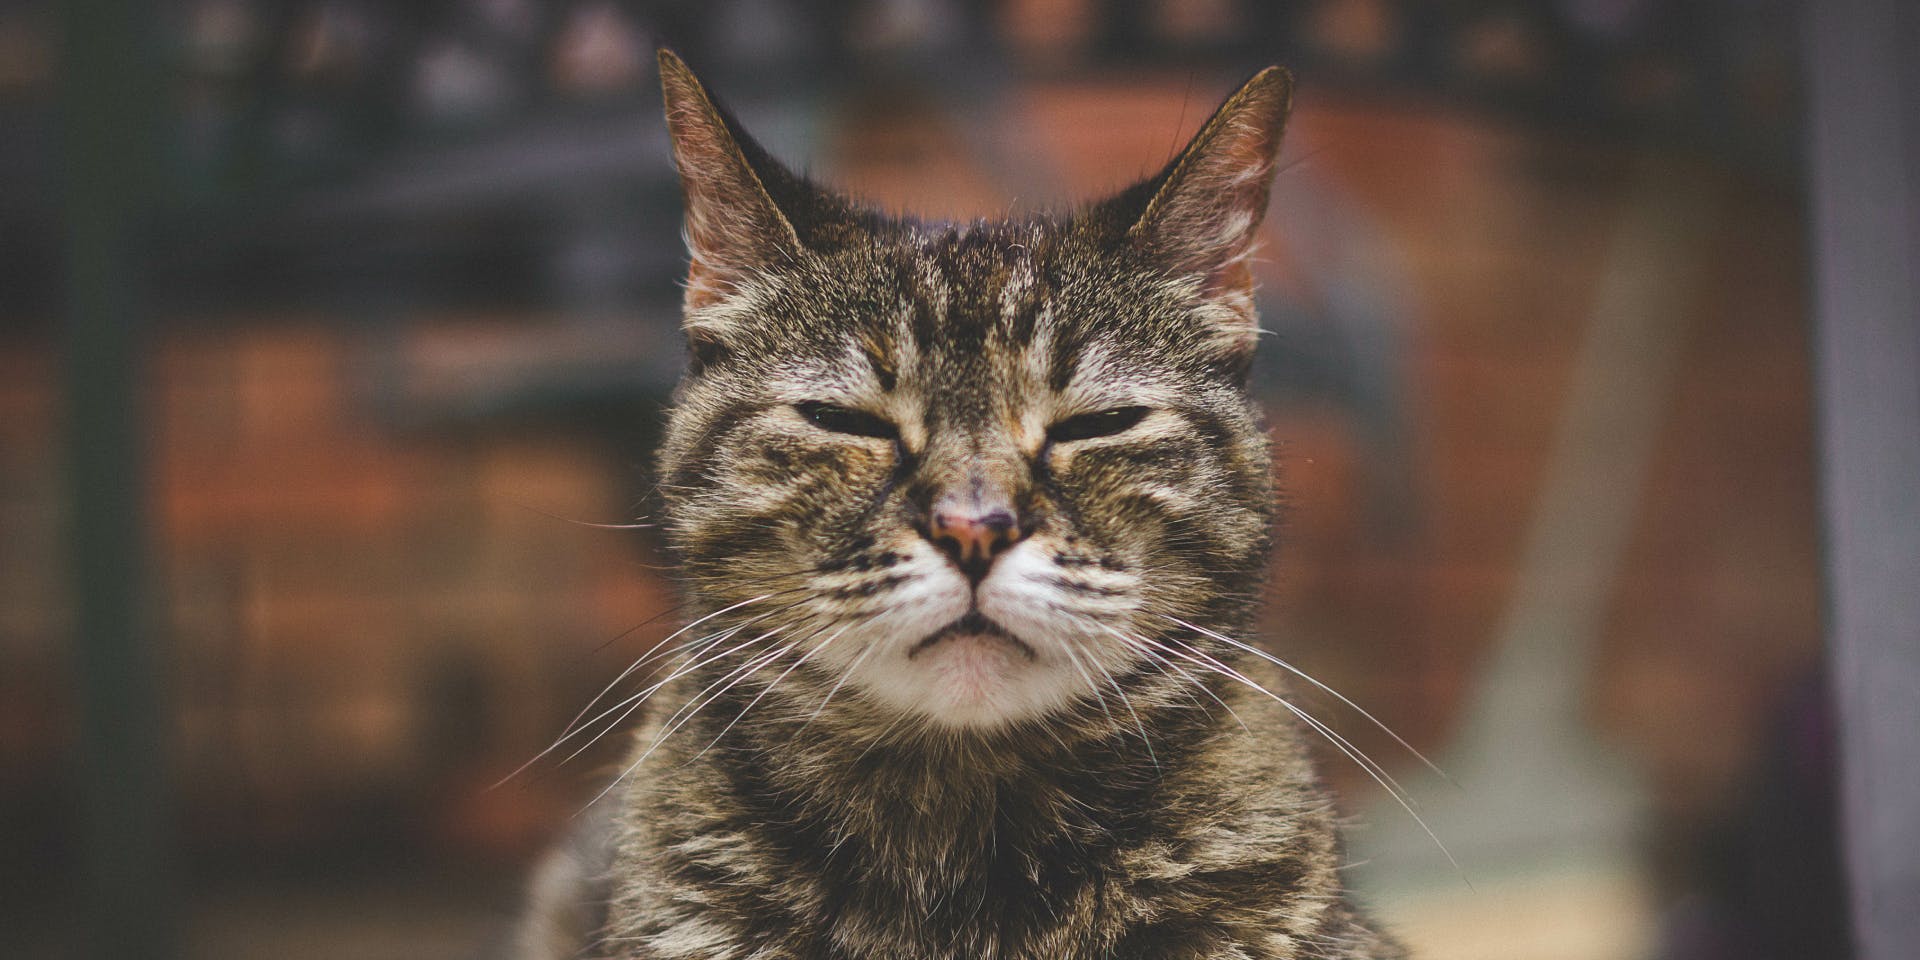 A tabby cat with their eyes closed.